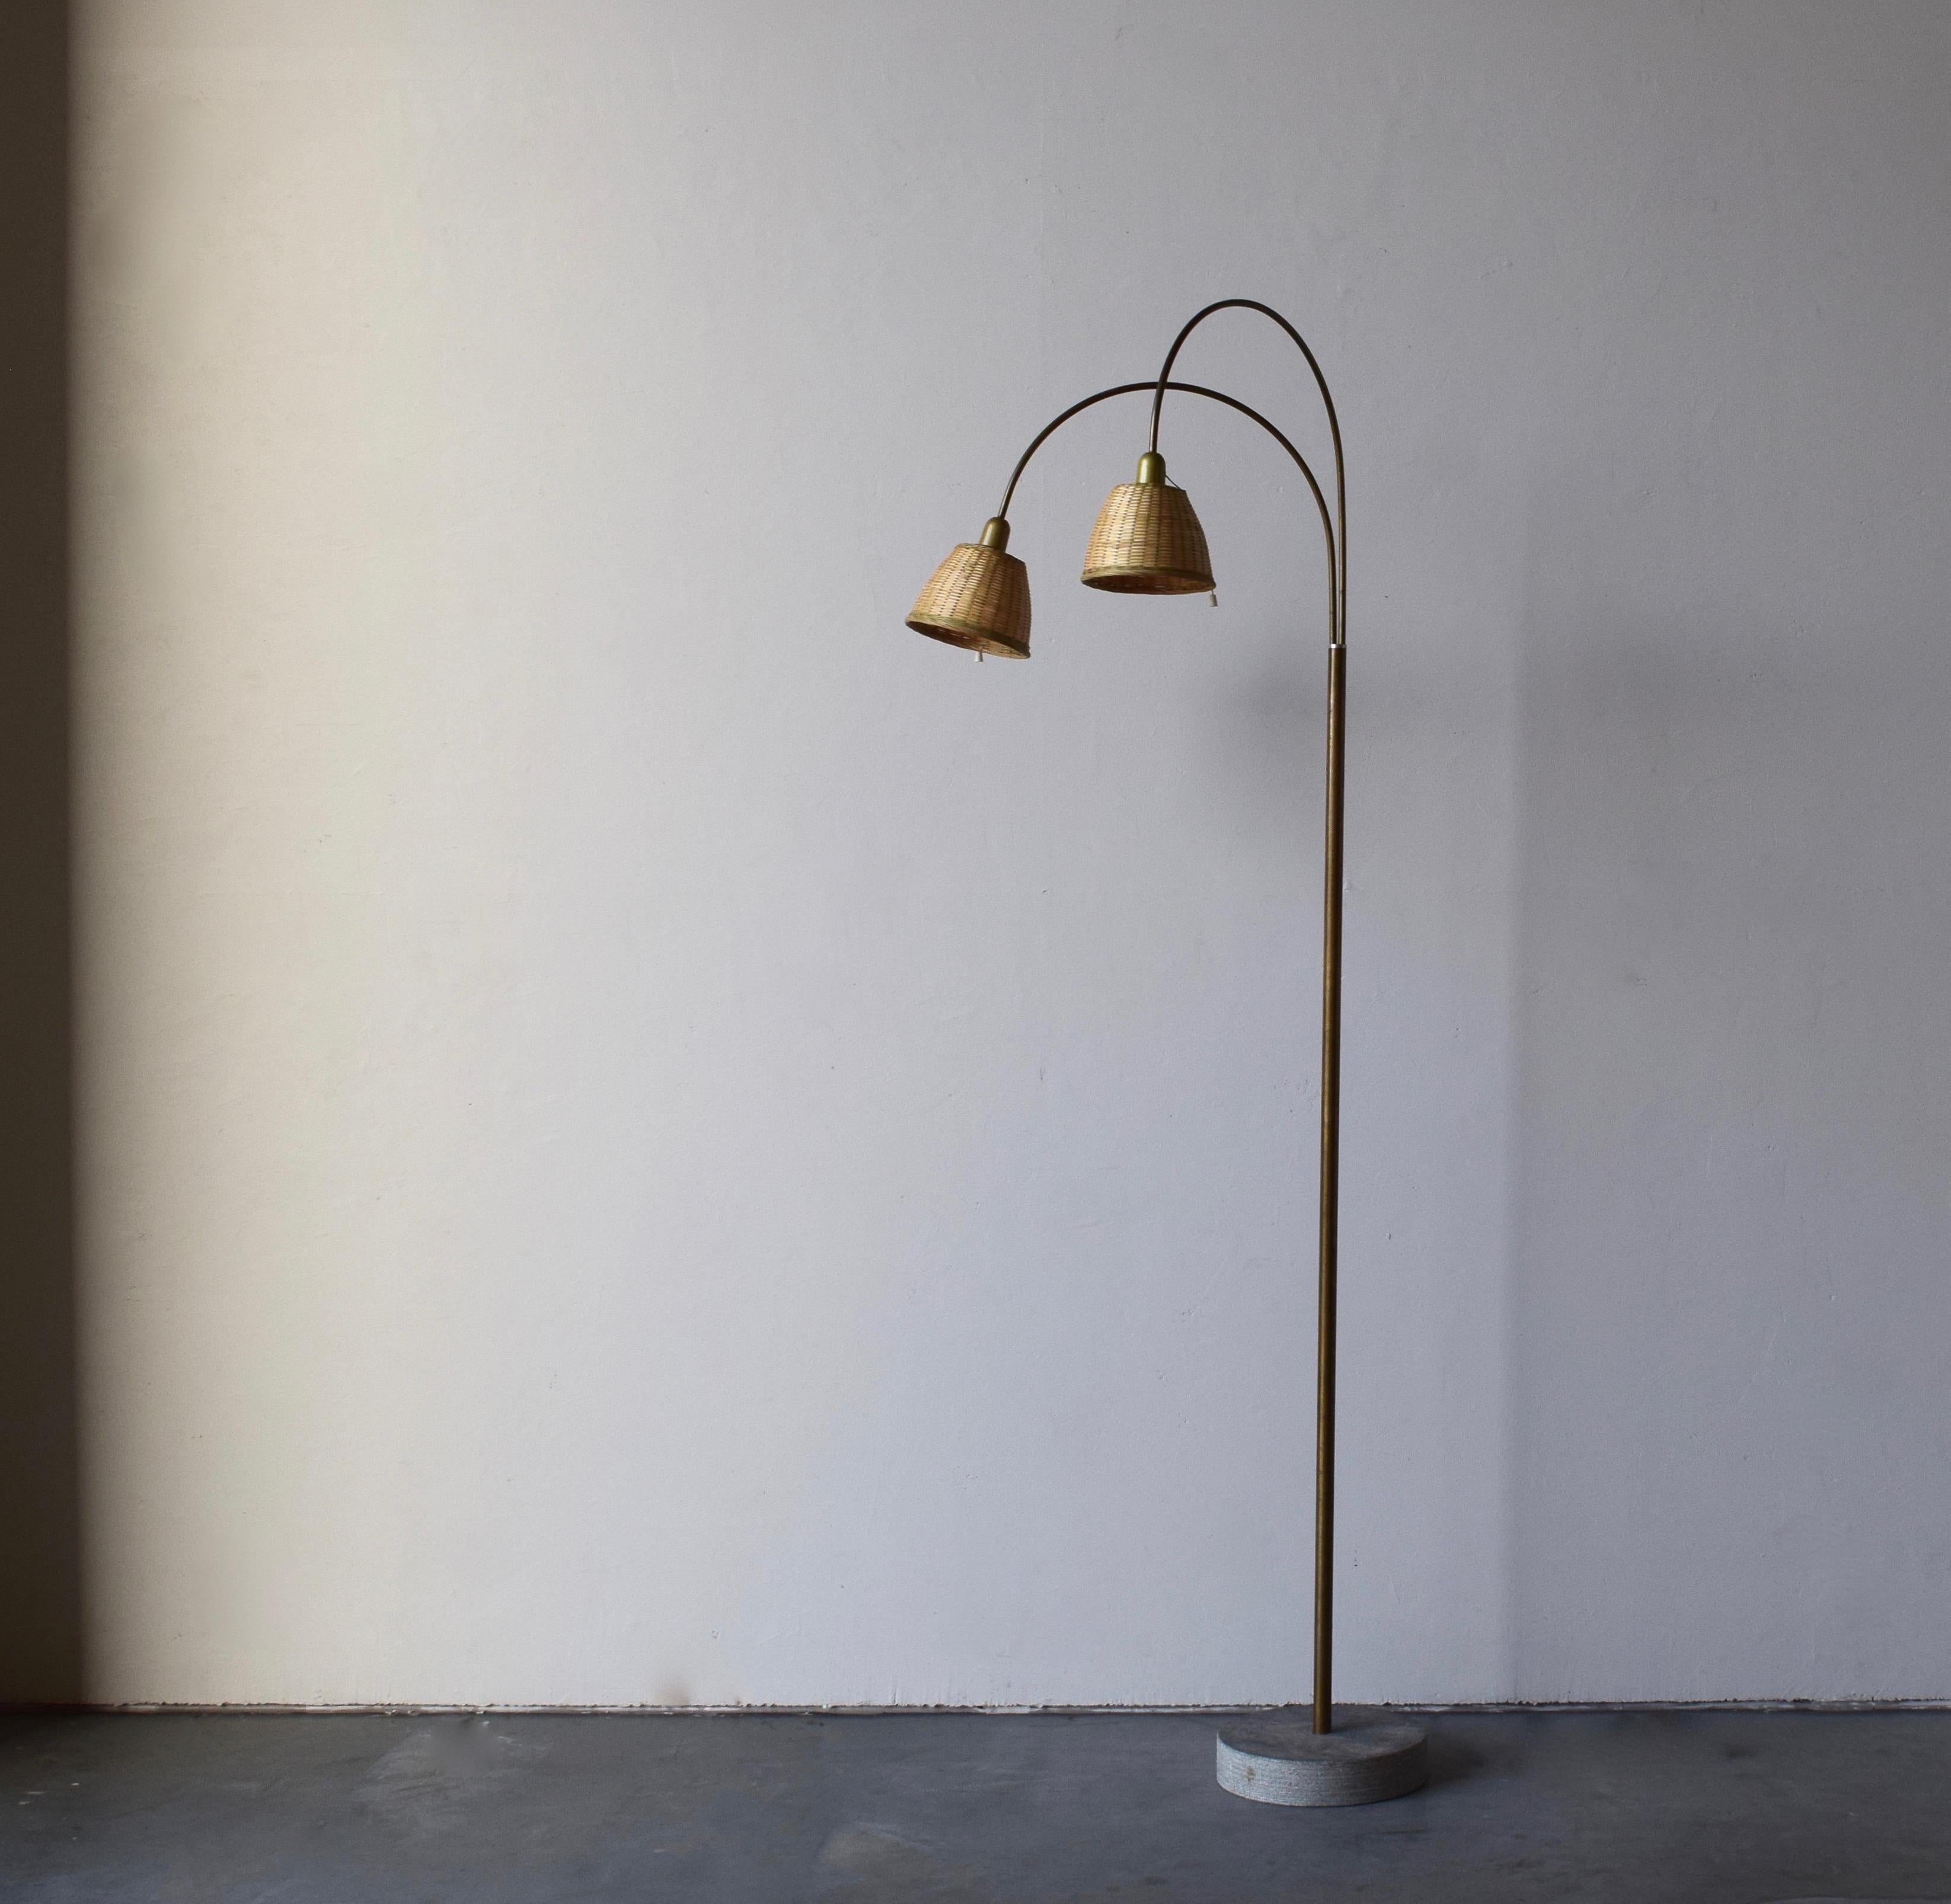 An adjustable two-armed floor lamp. Designed and produced in Finland, c. 1970s-1980s. Features brass, concrete, and assorted vintage rattan lampshades.

Stated dimensions measured as is illustrated in the third image.